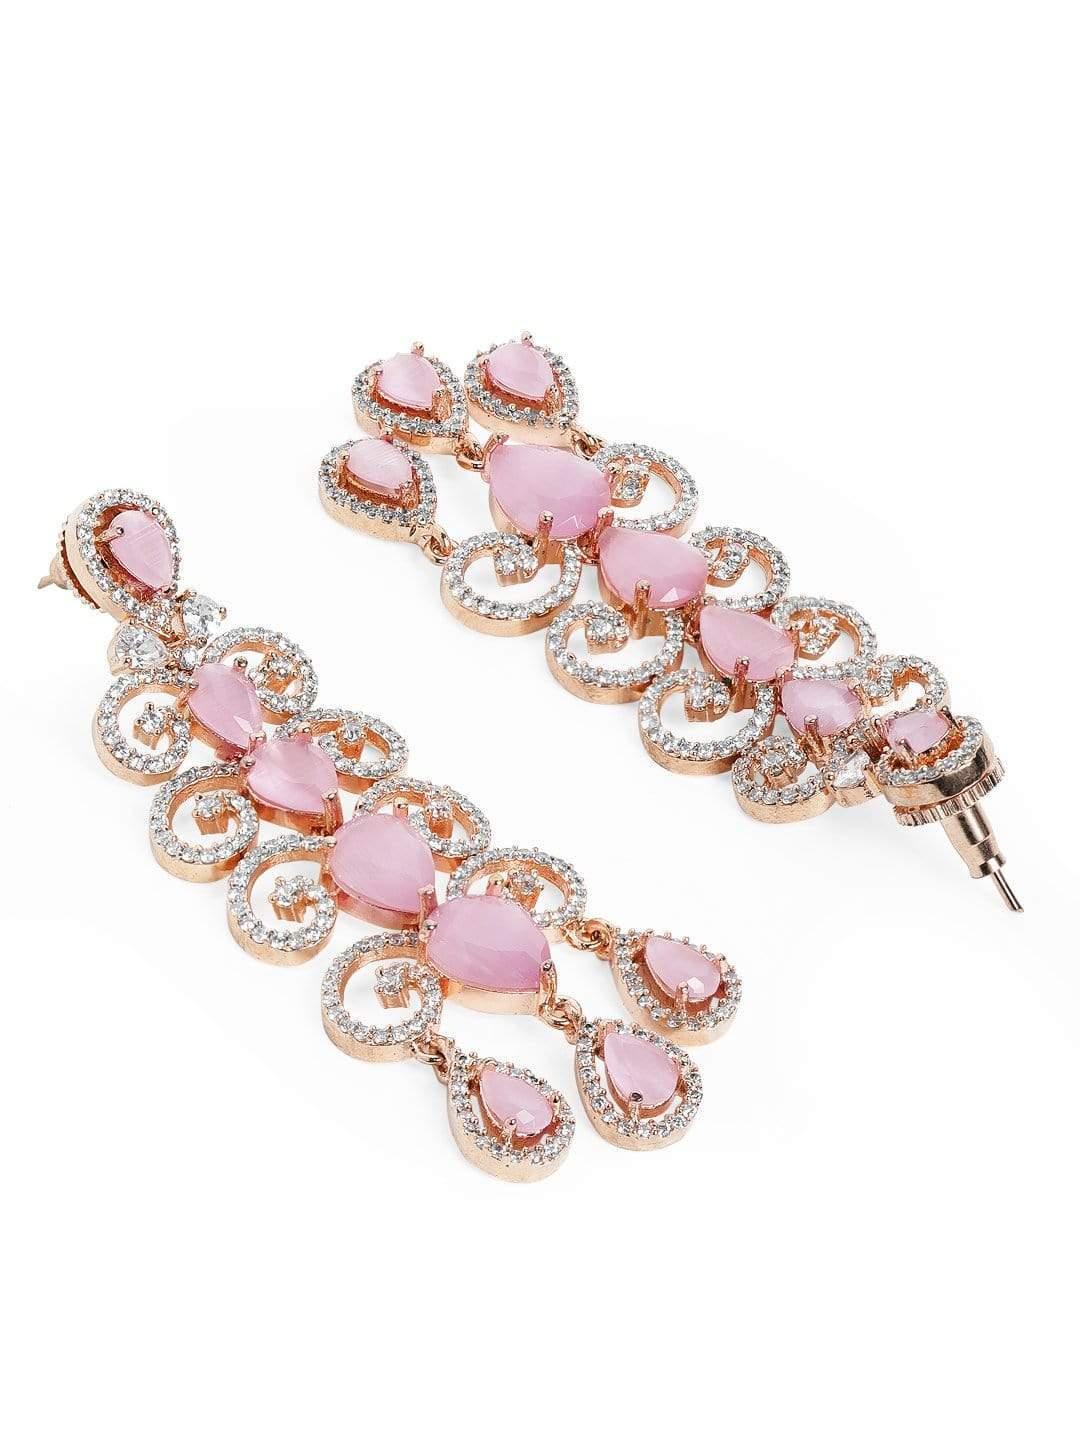 Coral Pink Stone studded Elegant Earrings - Indiakreations